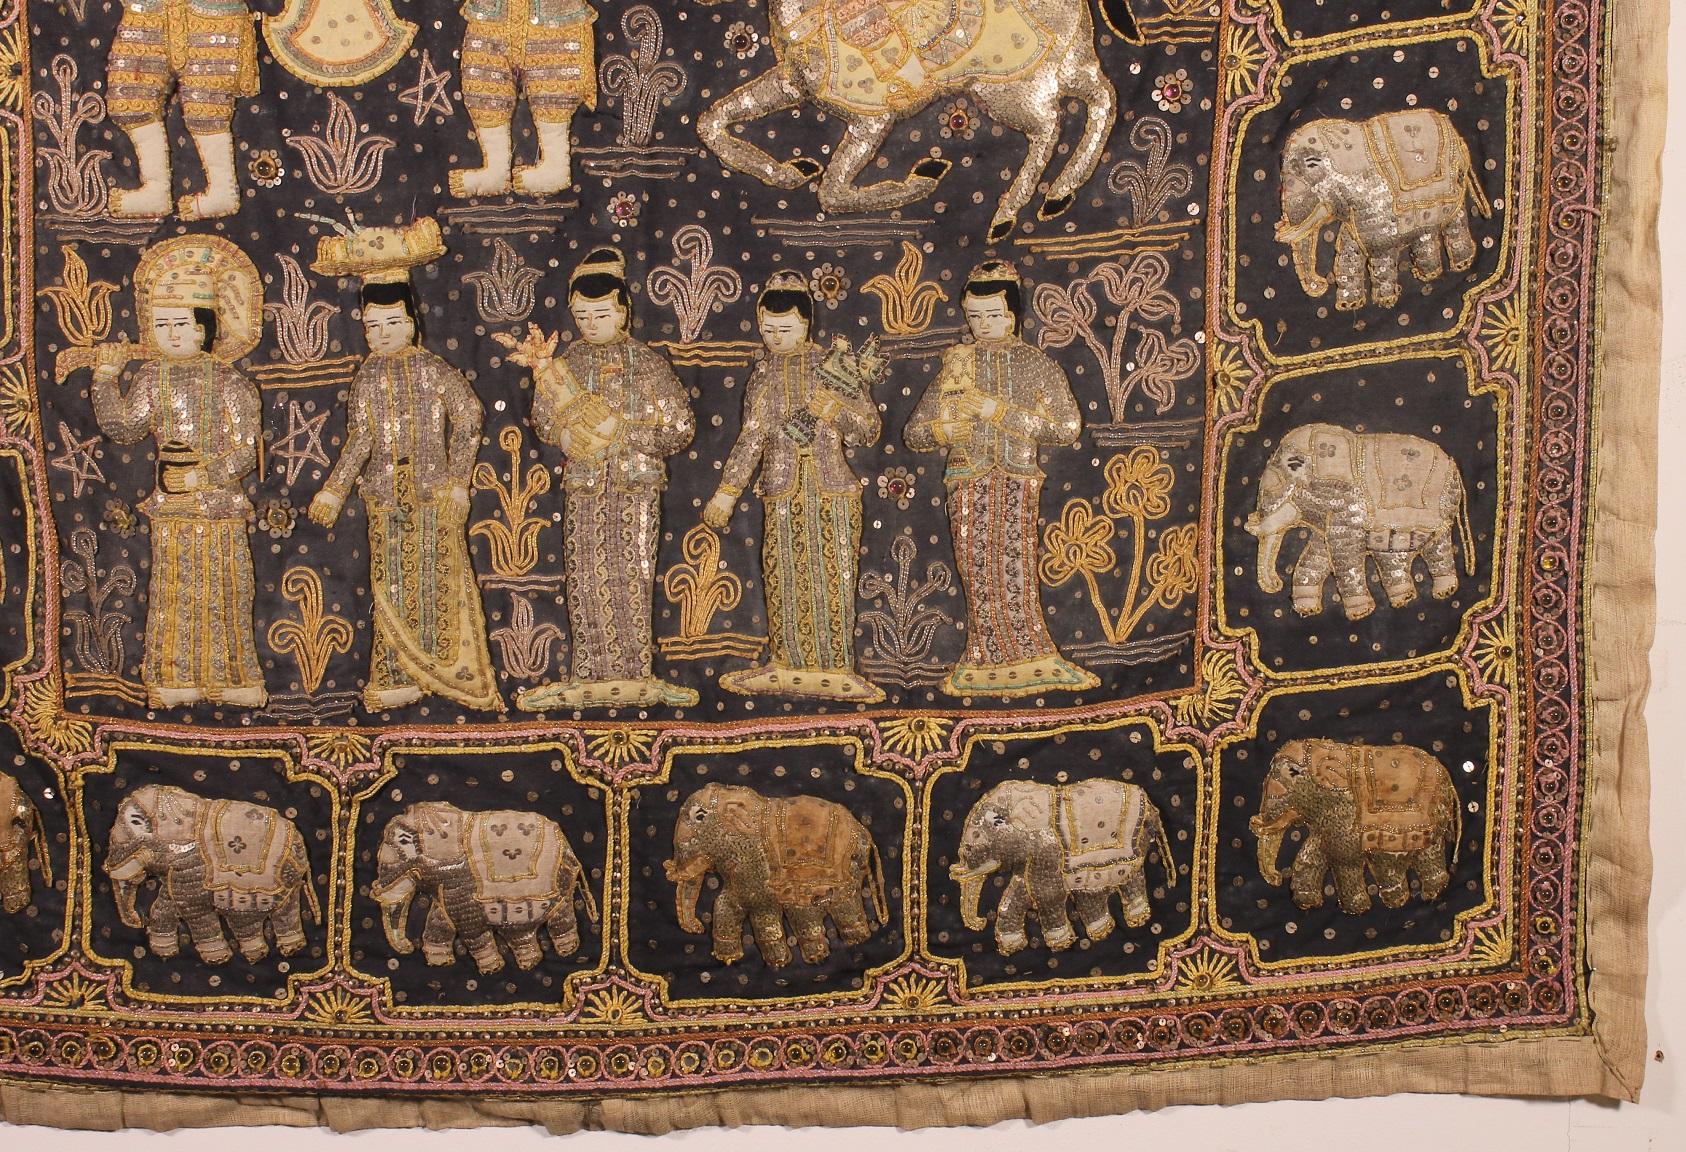 Beautiful 19th century Thai embroidery in cotton and silk

Very beautiful subject and in superb condition.